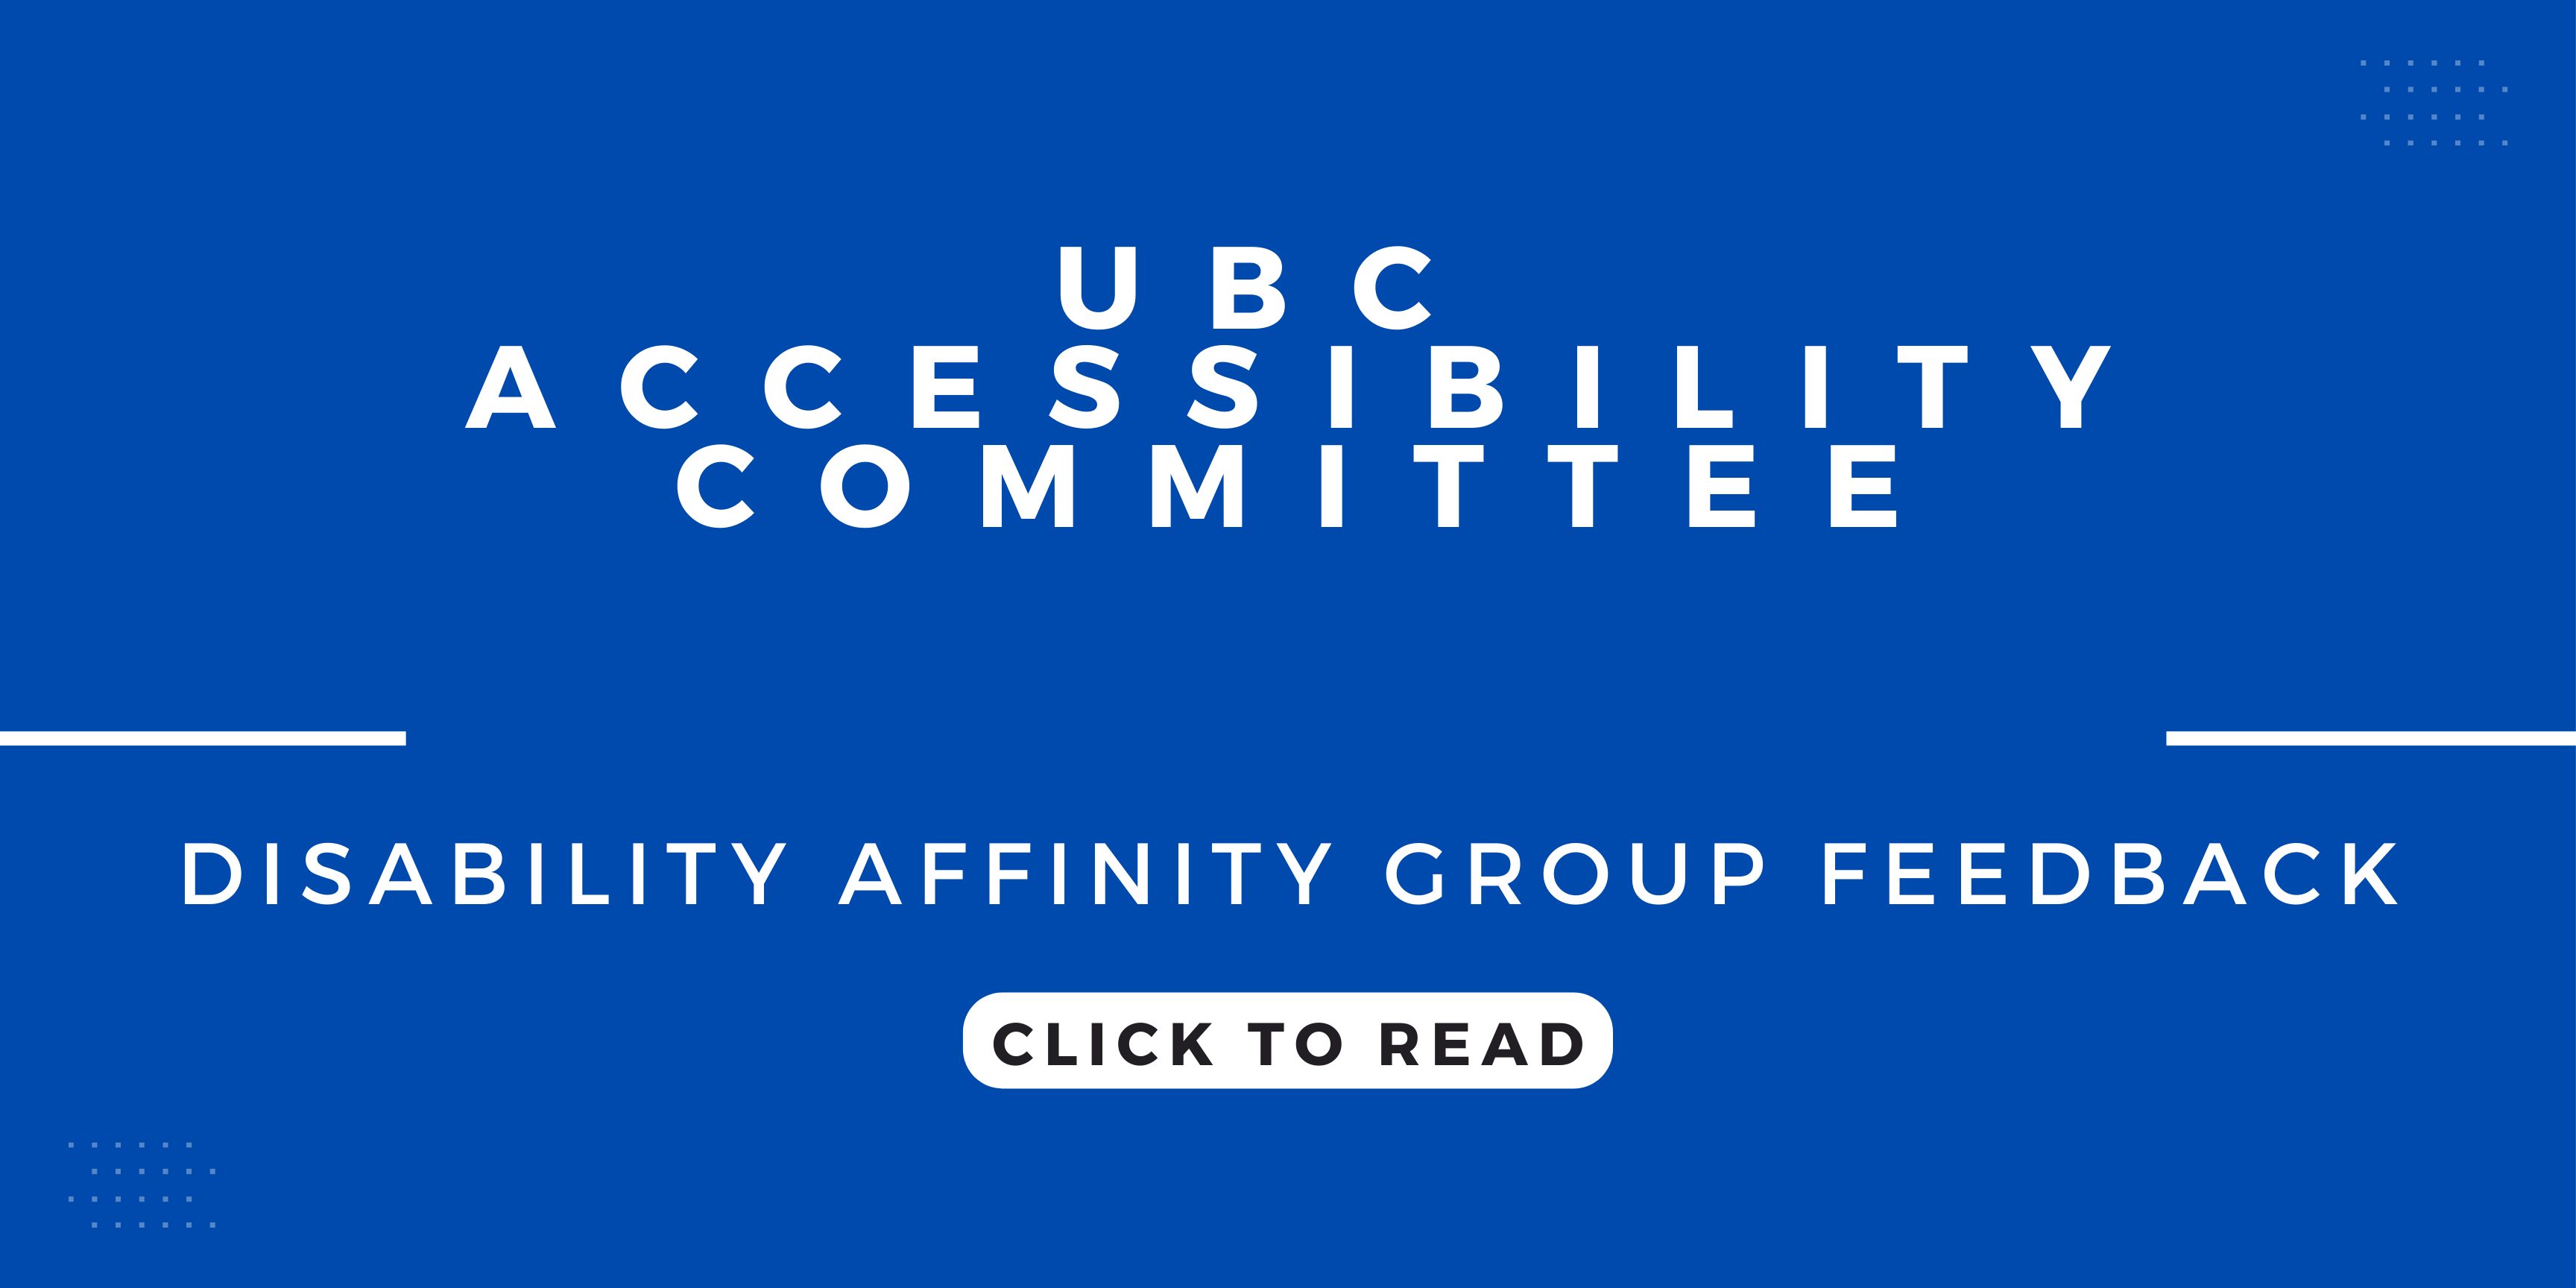 white text on a blue background: "UBC Accessibility Committee; Disability Affinity Group Feedback. Click to Read"